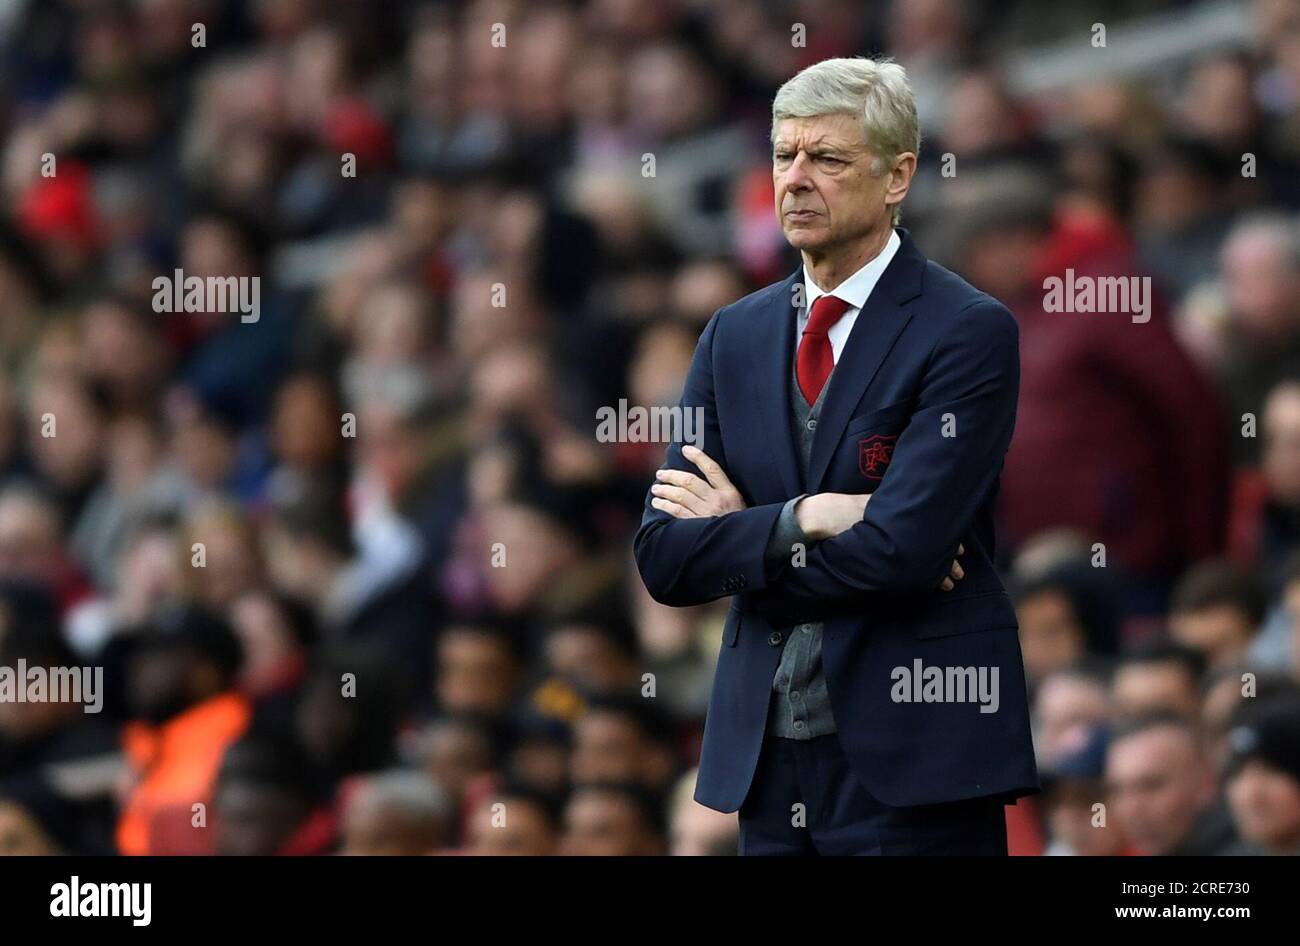 Soccer Football - Premier League - Arsenal vs Watford - Emirates Stadium, London, Britain - March 11, 2018   Arsenal manager Arsene Wenger      Action Images via Reuters/Tony O'Brien    EDITORIAL USE ONLY. No use with unauthorized audio, video, data, fixture lists, club/league logos or 'live' services. Online in-match use limited to 75 images, no video emulation. No use in betting, games or single club/league/player publications.  Please contact your account representative for further details. Stock Photo